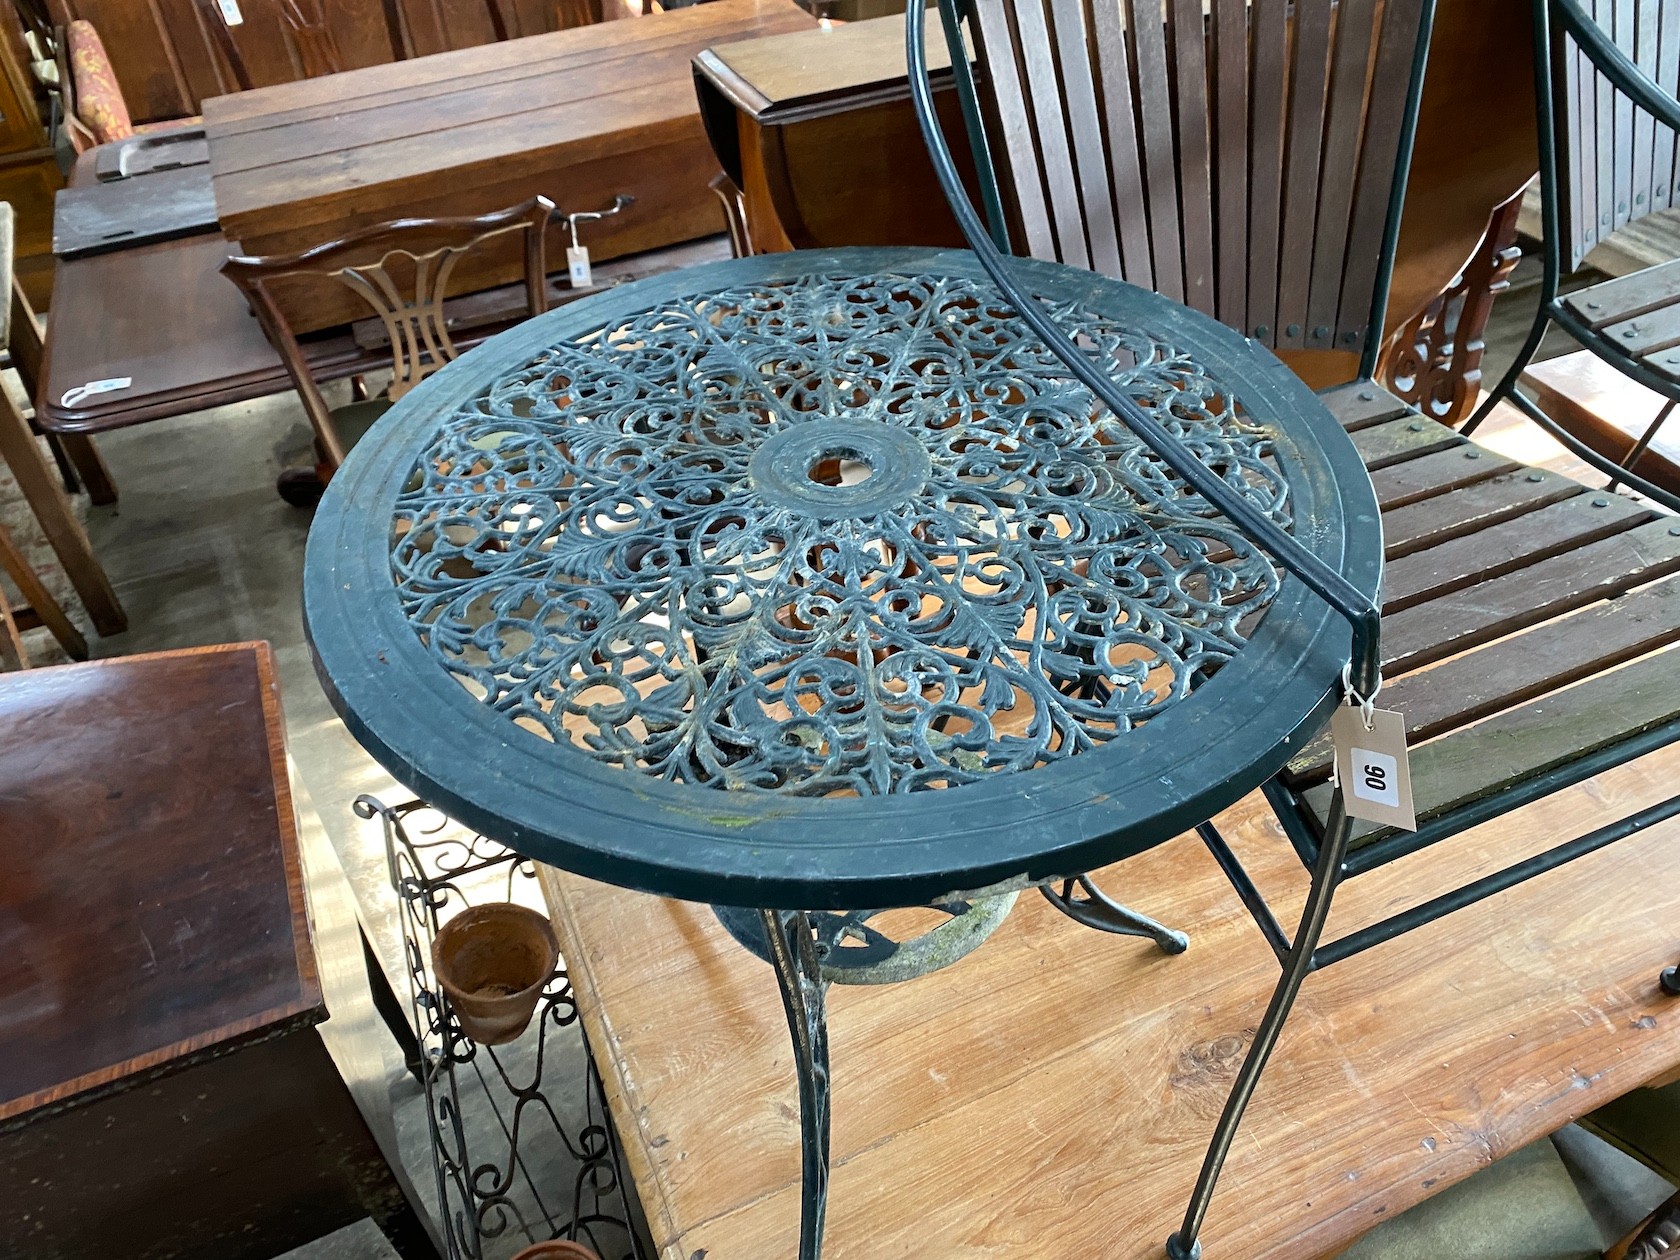 Two wrought iron slatted garden chairs, a circular table and a wrought iron pot stand